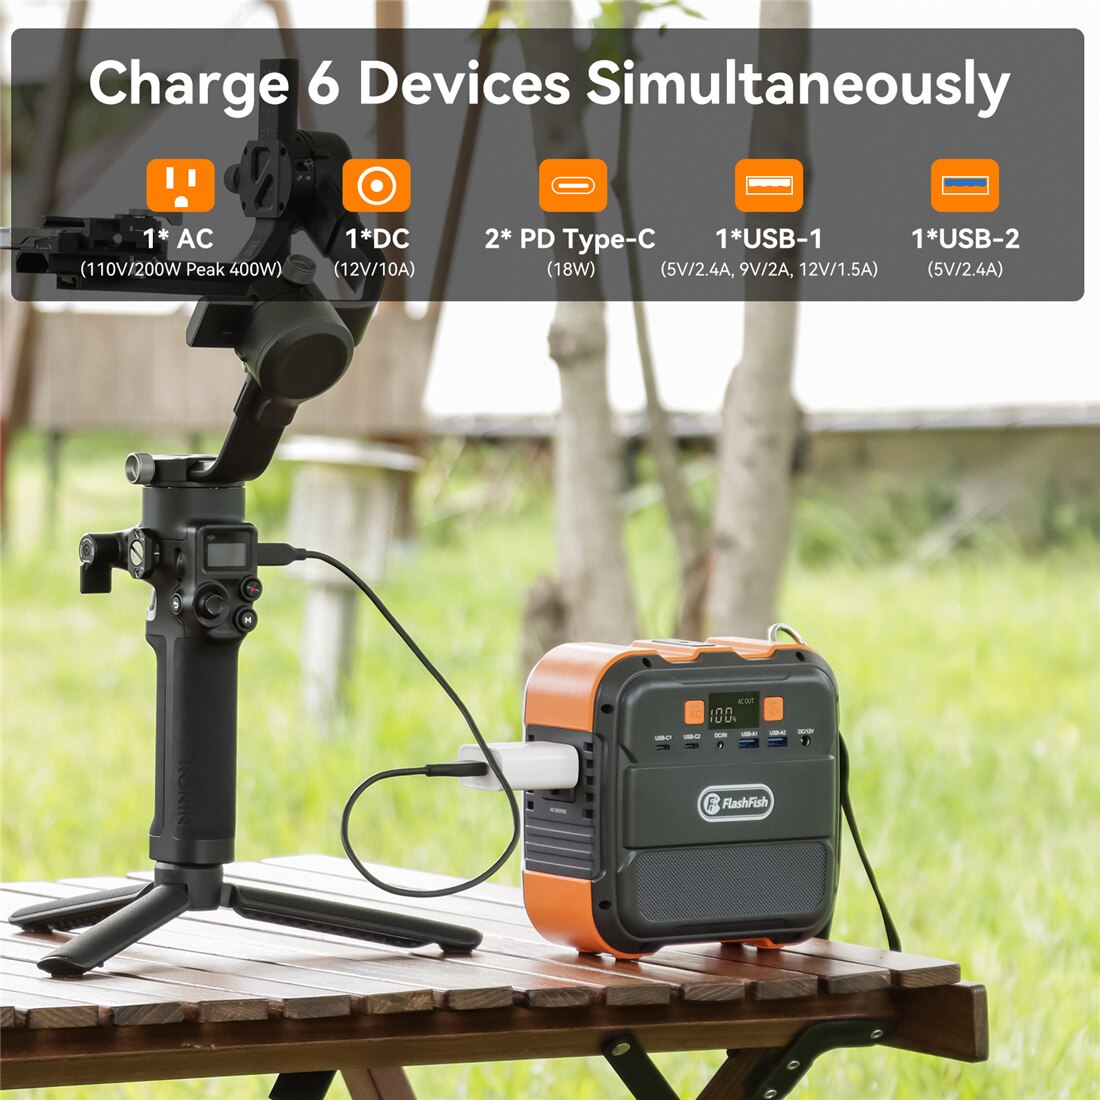 Charge 6 Devices Simultaneously 1*AC 1